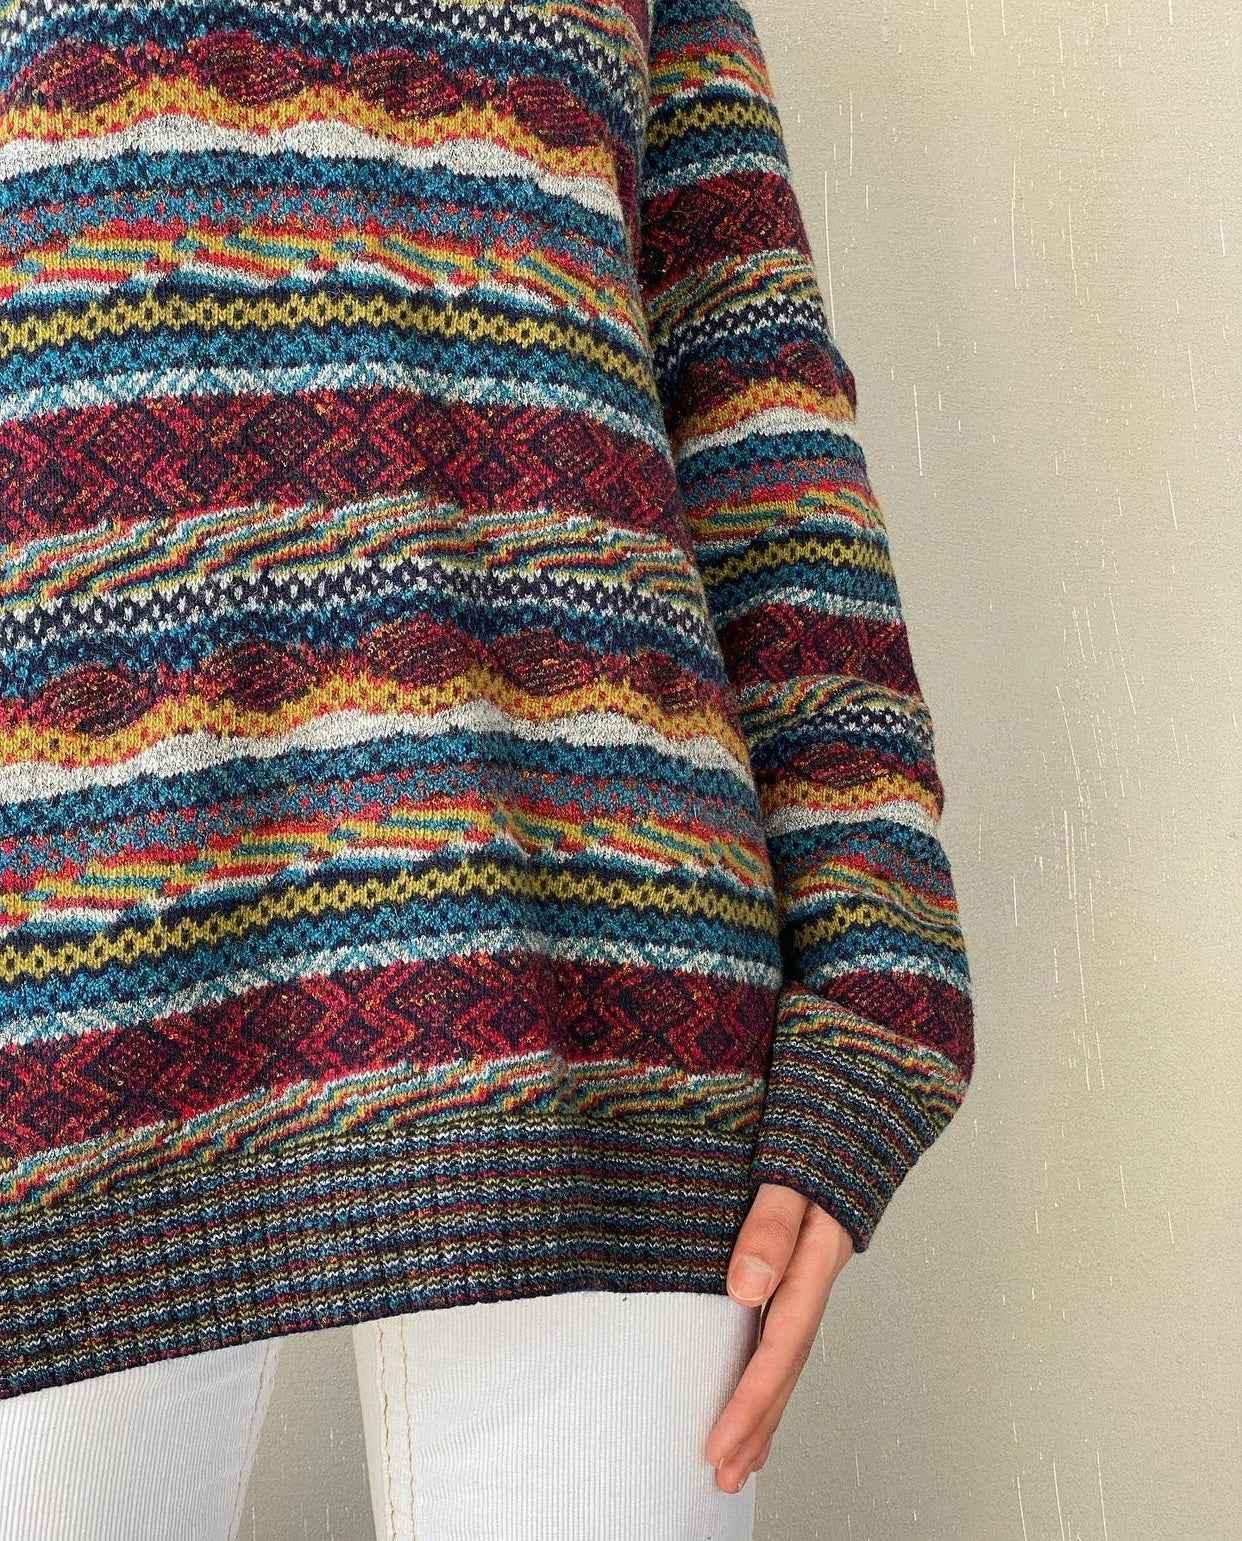 Vintage 80s/90s Norm Thompson patterned knitted sweater - Balagan Vintage